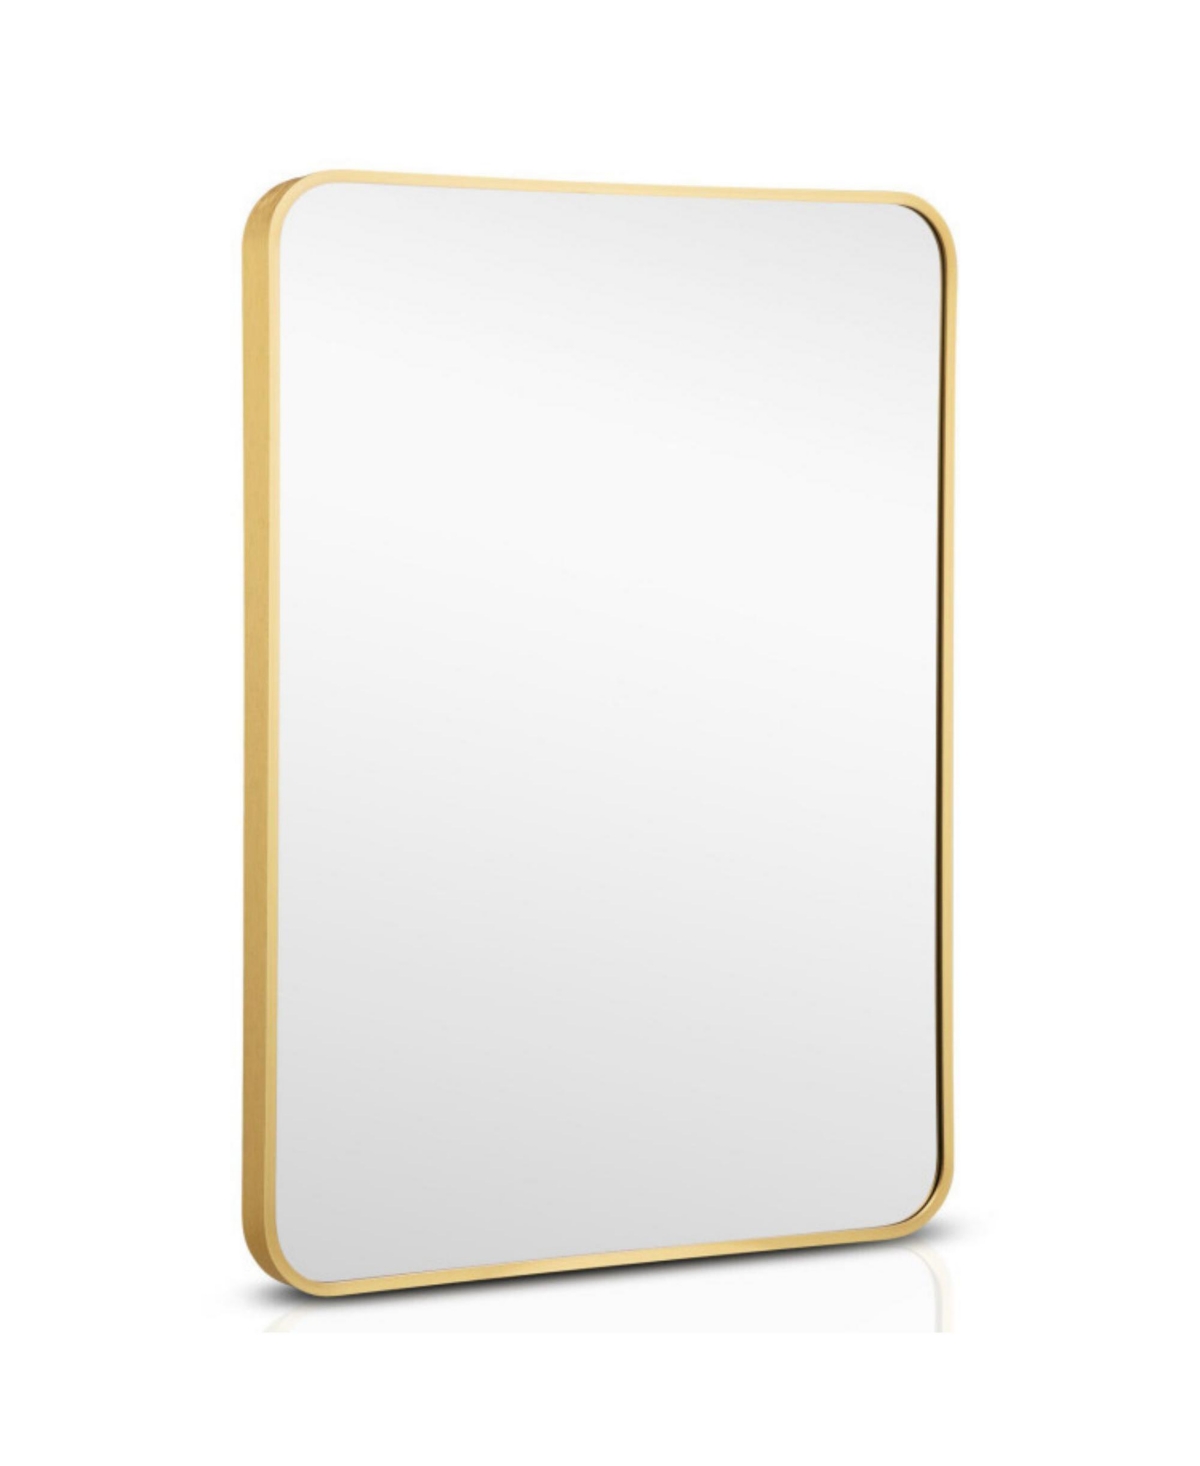 Metal Framed Bathroom Mirror with Rounded Corners - Gold